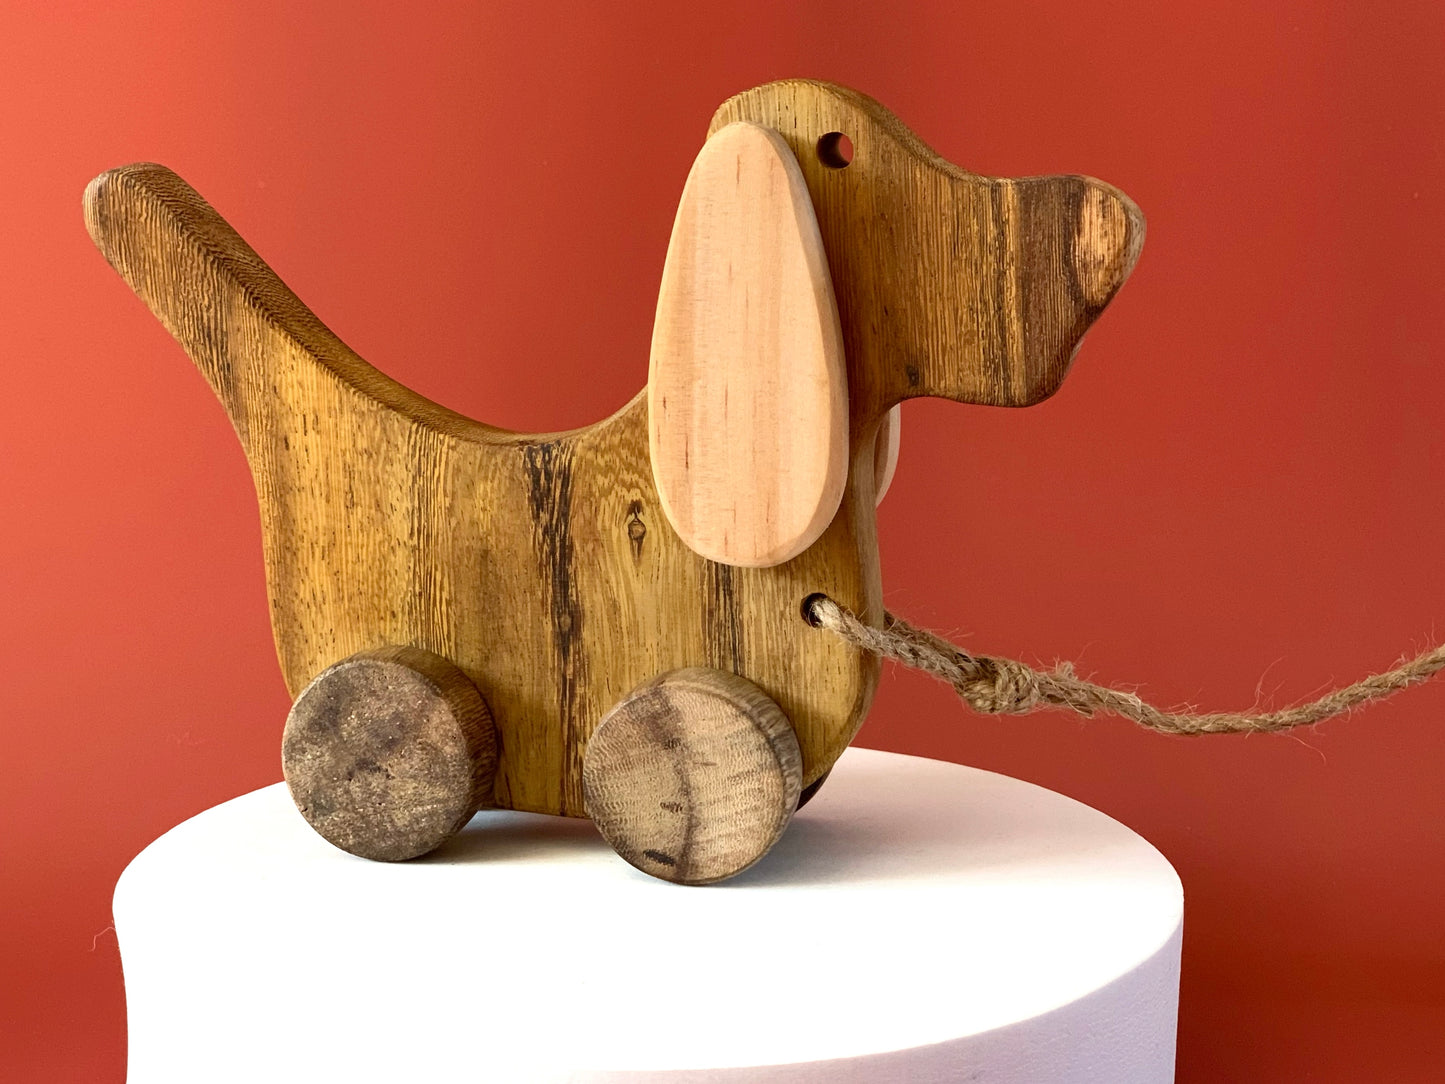 Wooden Dog Pull Toy - My first wooden toy